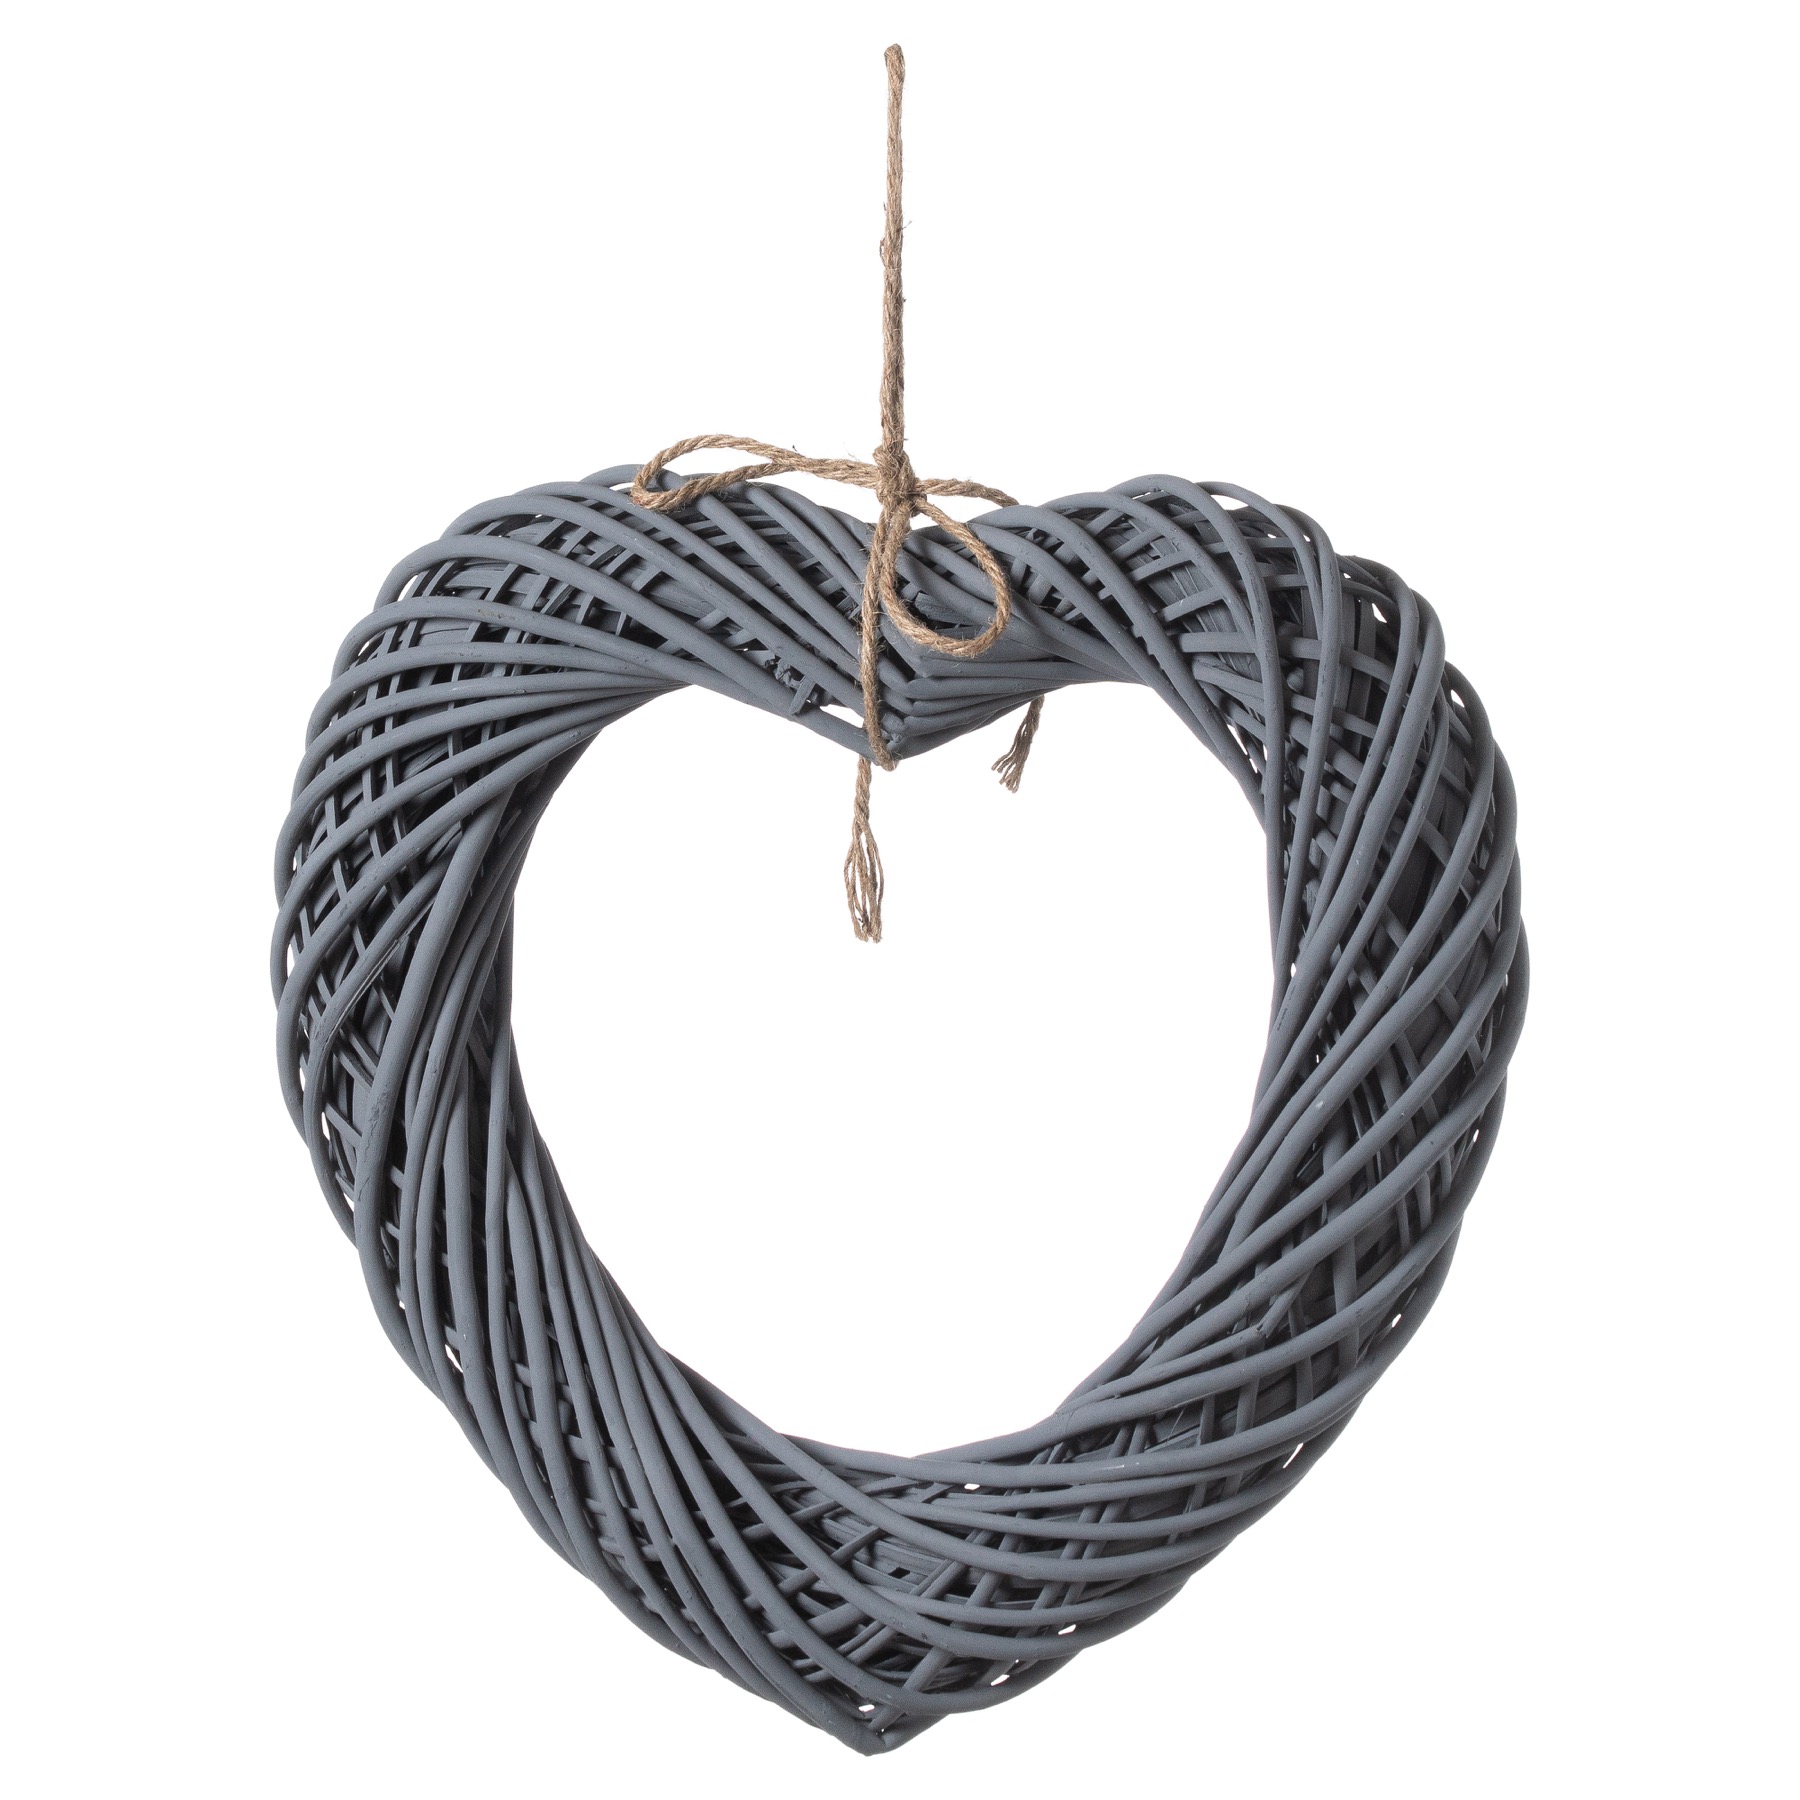 Grey Large Wicker Hanging Heart With Rope Detail - Image 1